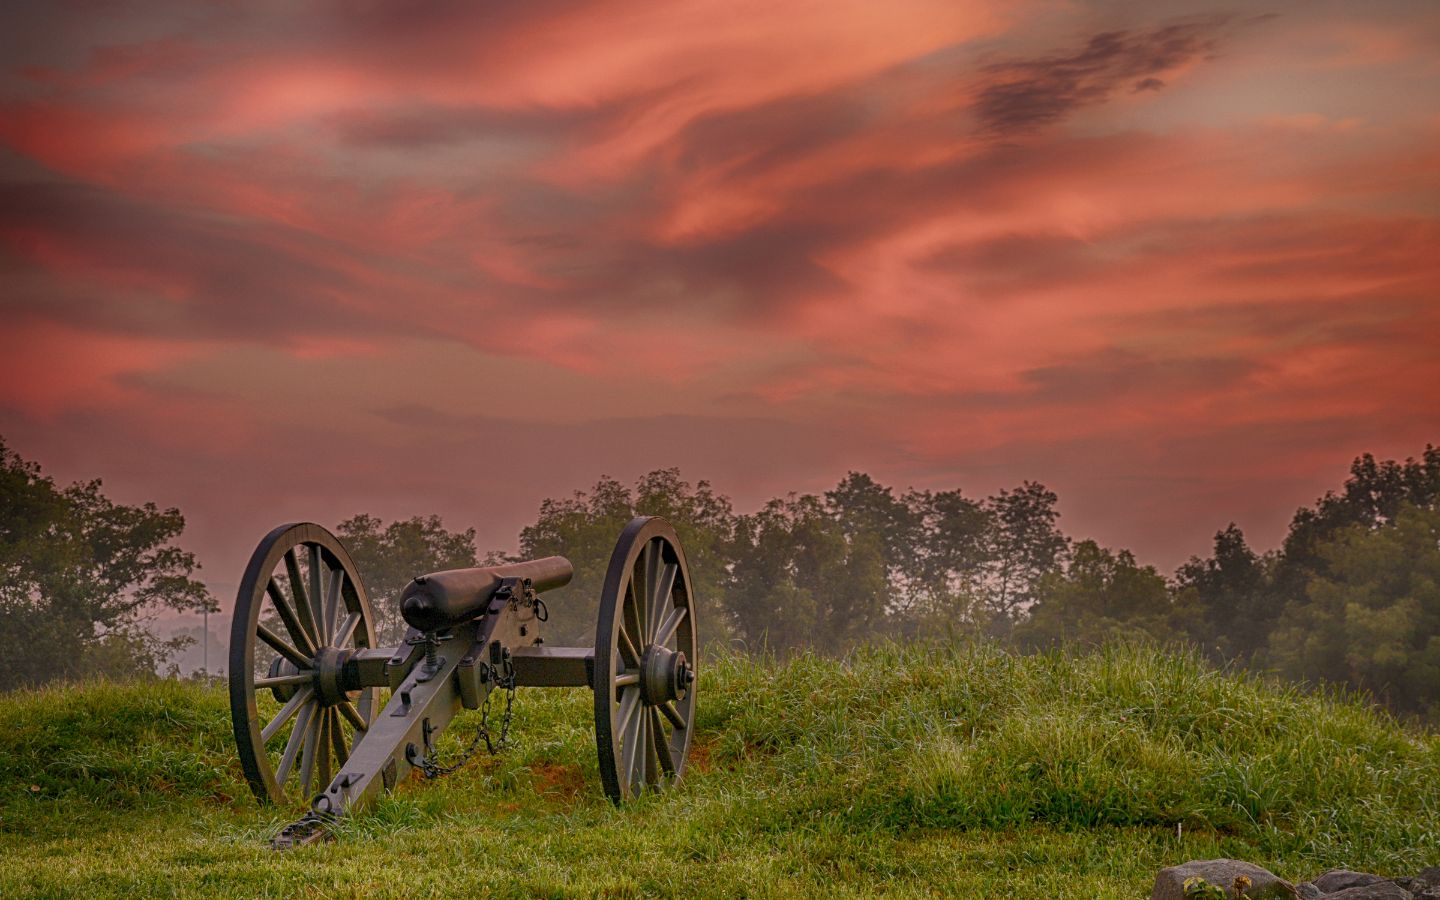 Civil war cannon against a red, sunset sky